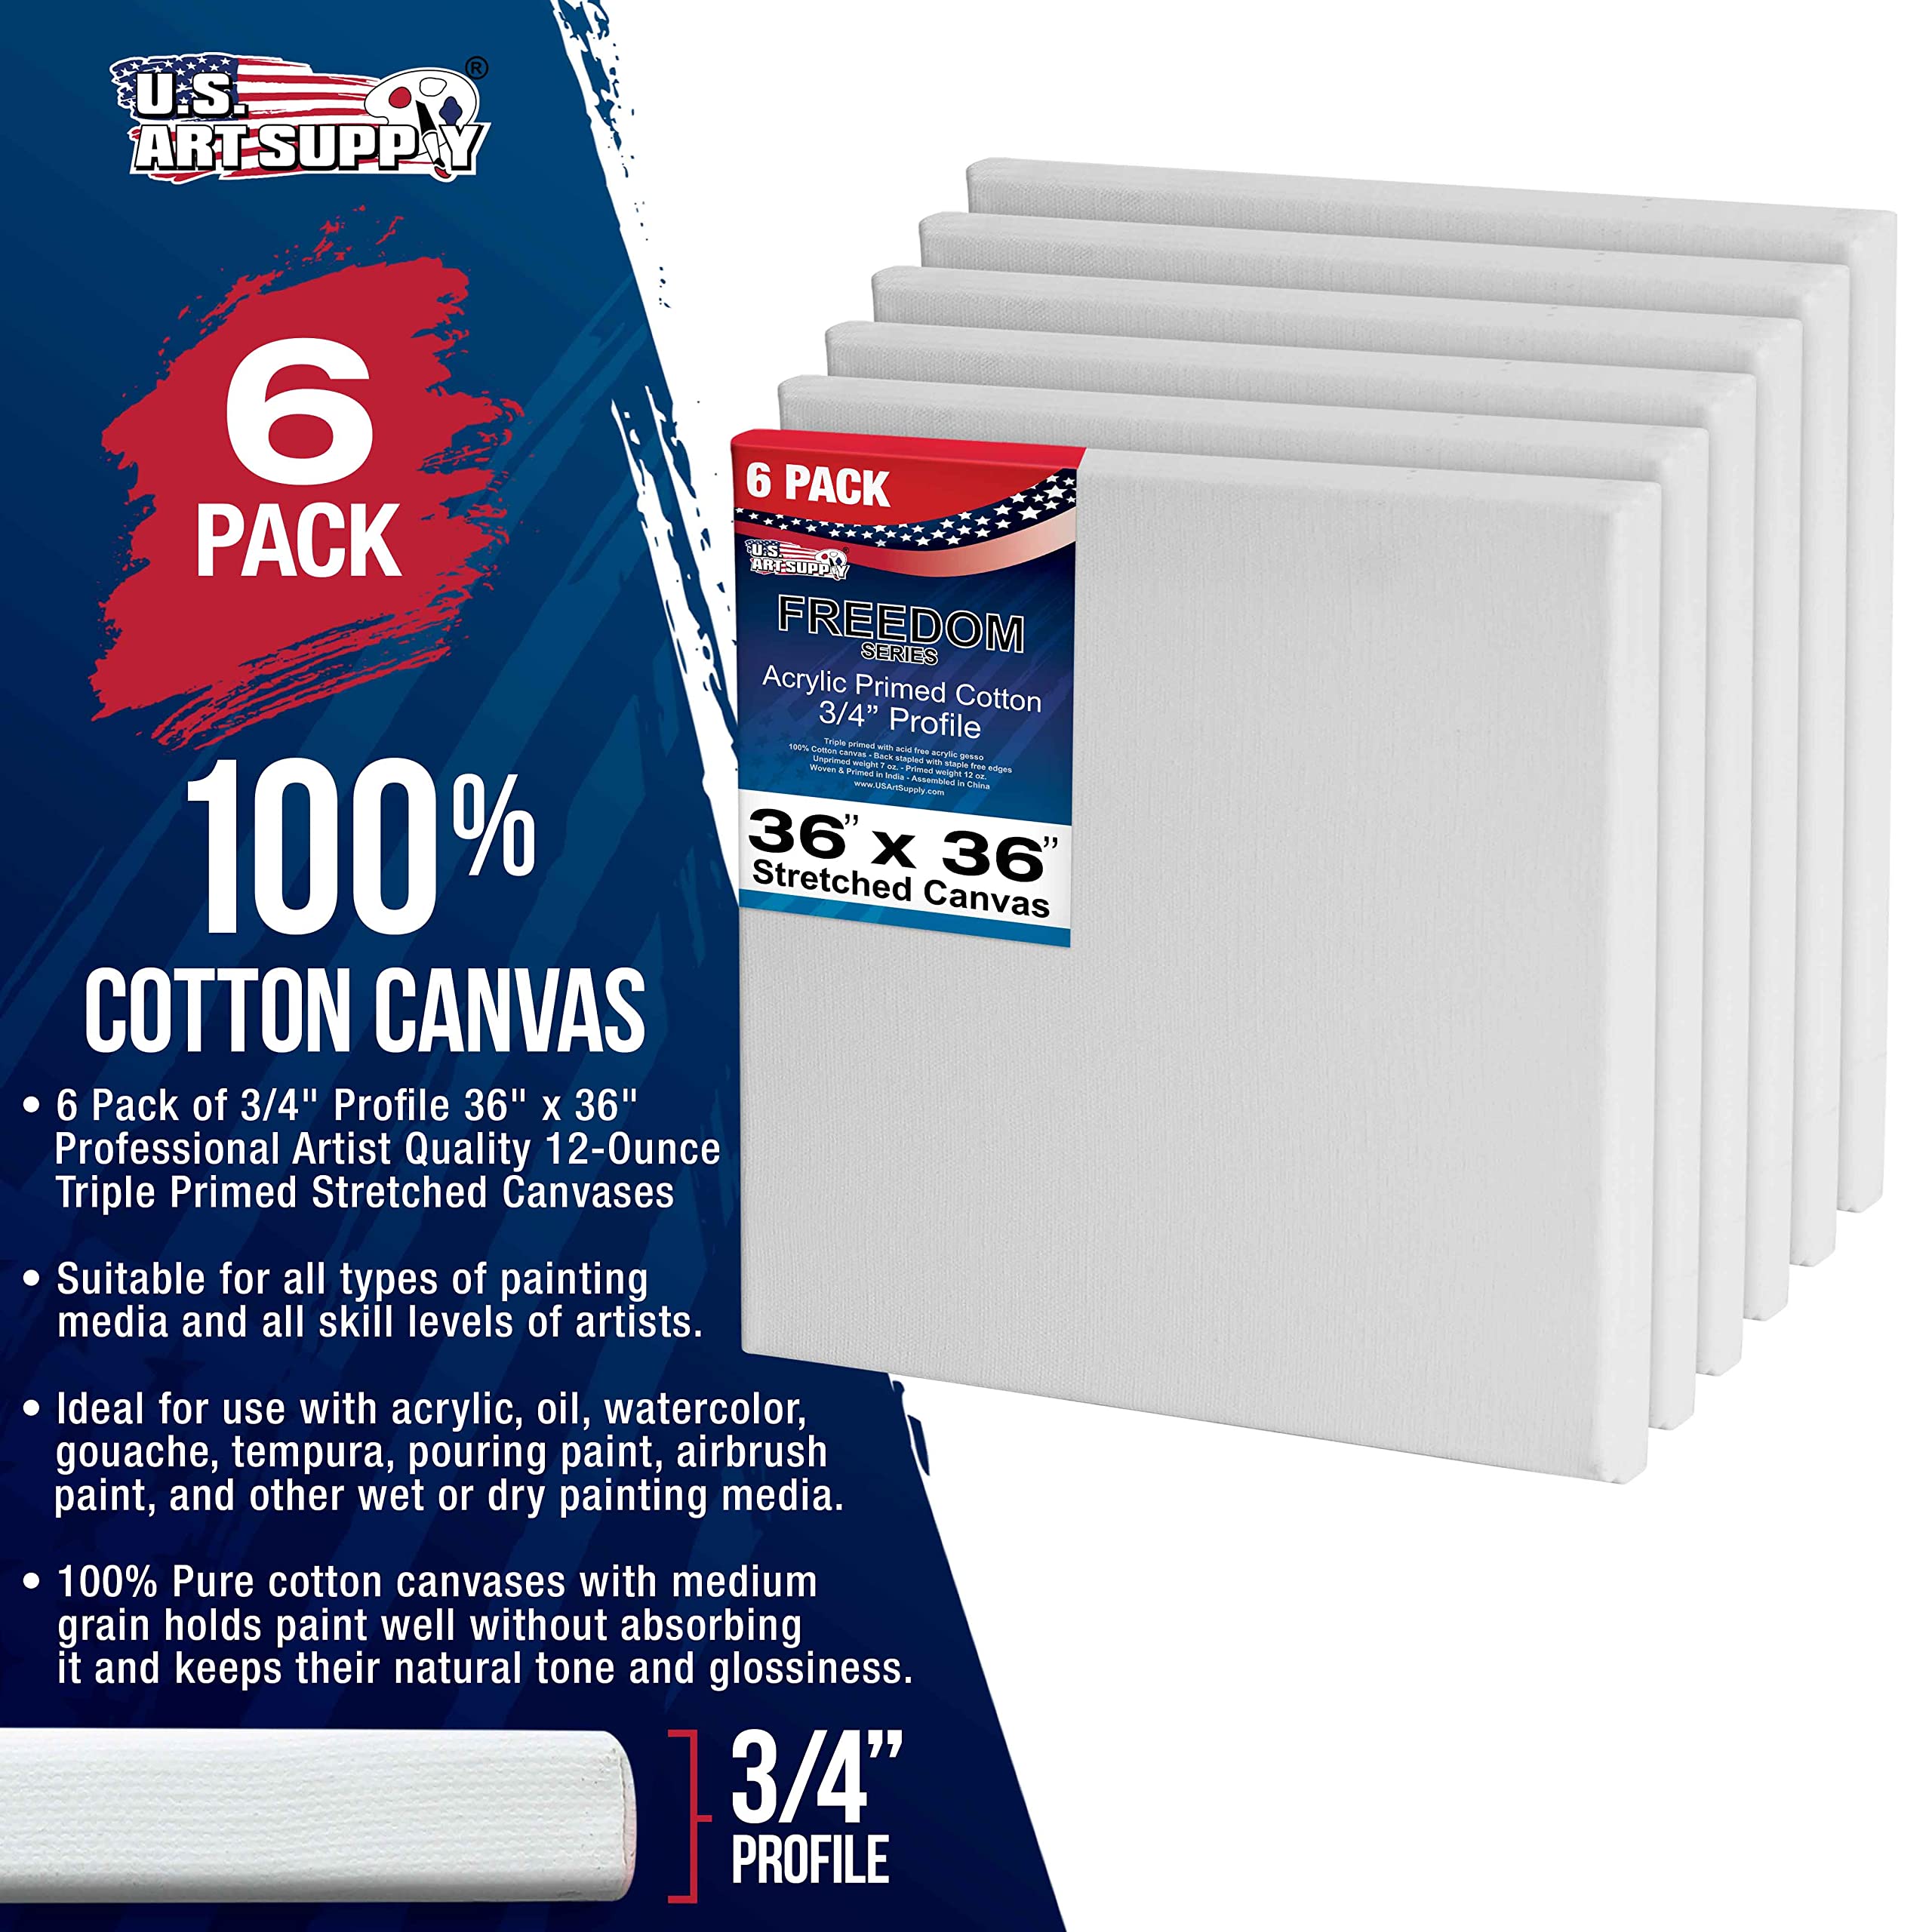 U.S. Art Supply 36 x 36 inch Stretched Canvas 12-Ounce Triple Primed, 6-Pack - Professional Artist Quality White Blank 3/4" Profile, 100% Cotton, Heavy-Weight Gesso - Acrylic Pouring, Oil Painting